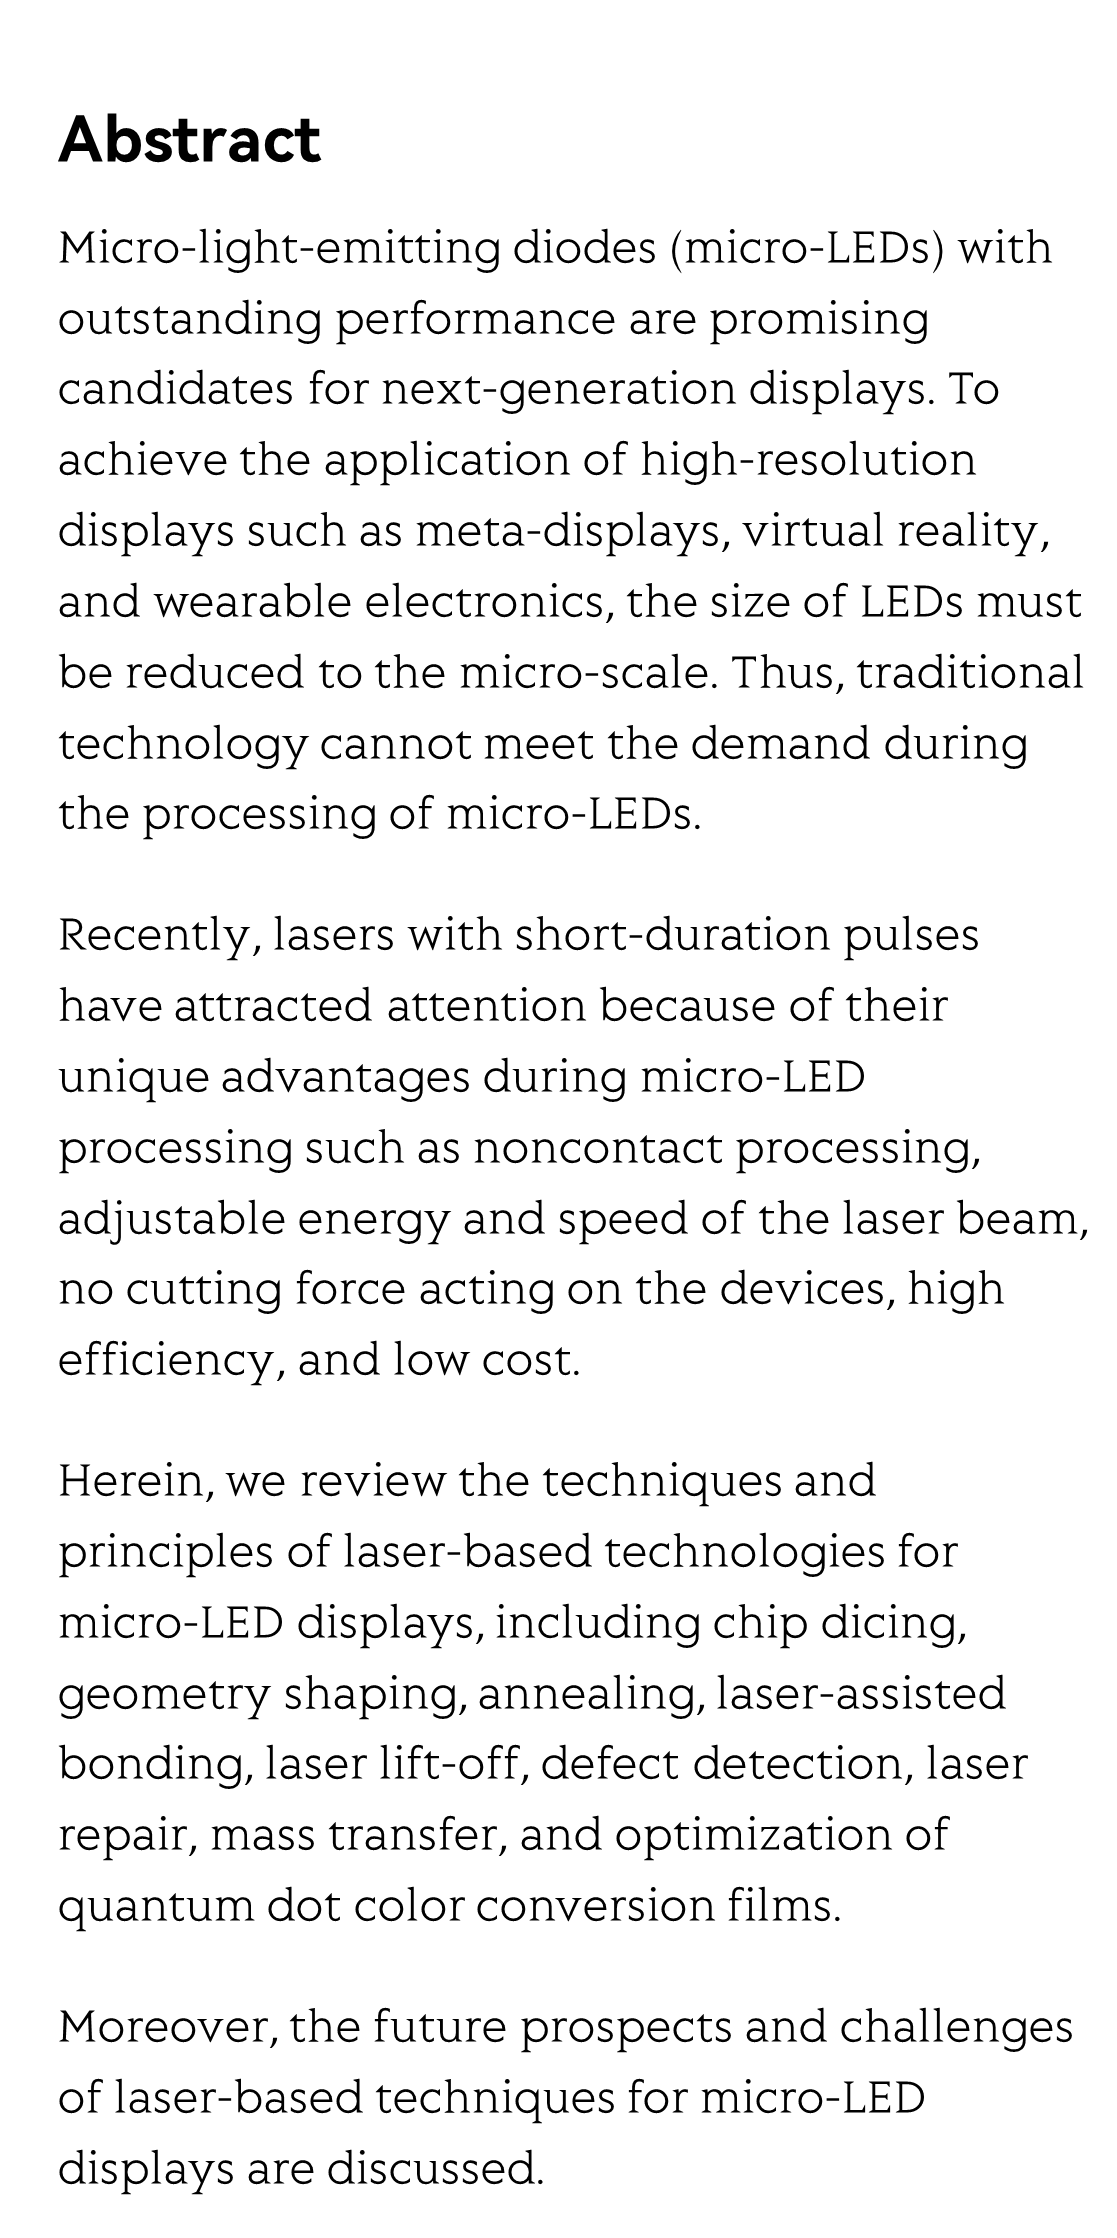 Applications of lasers: A promising route toward low-cost fabrication of high-efficiency full-color micro-LED displays_2